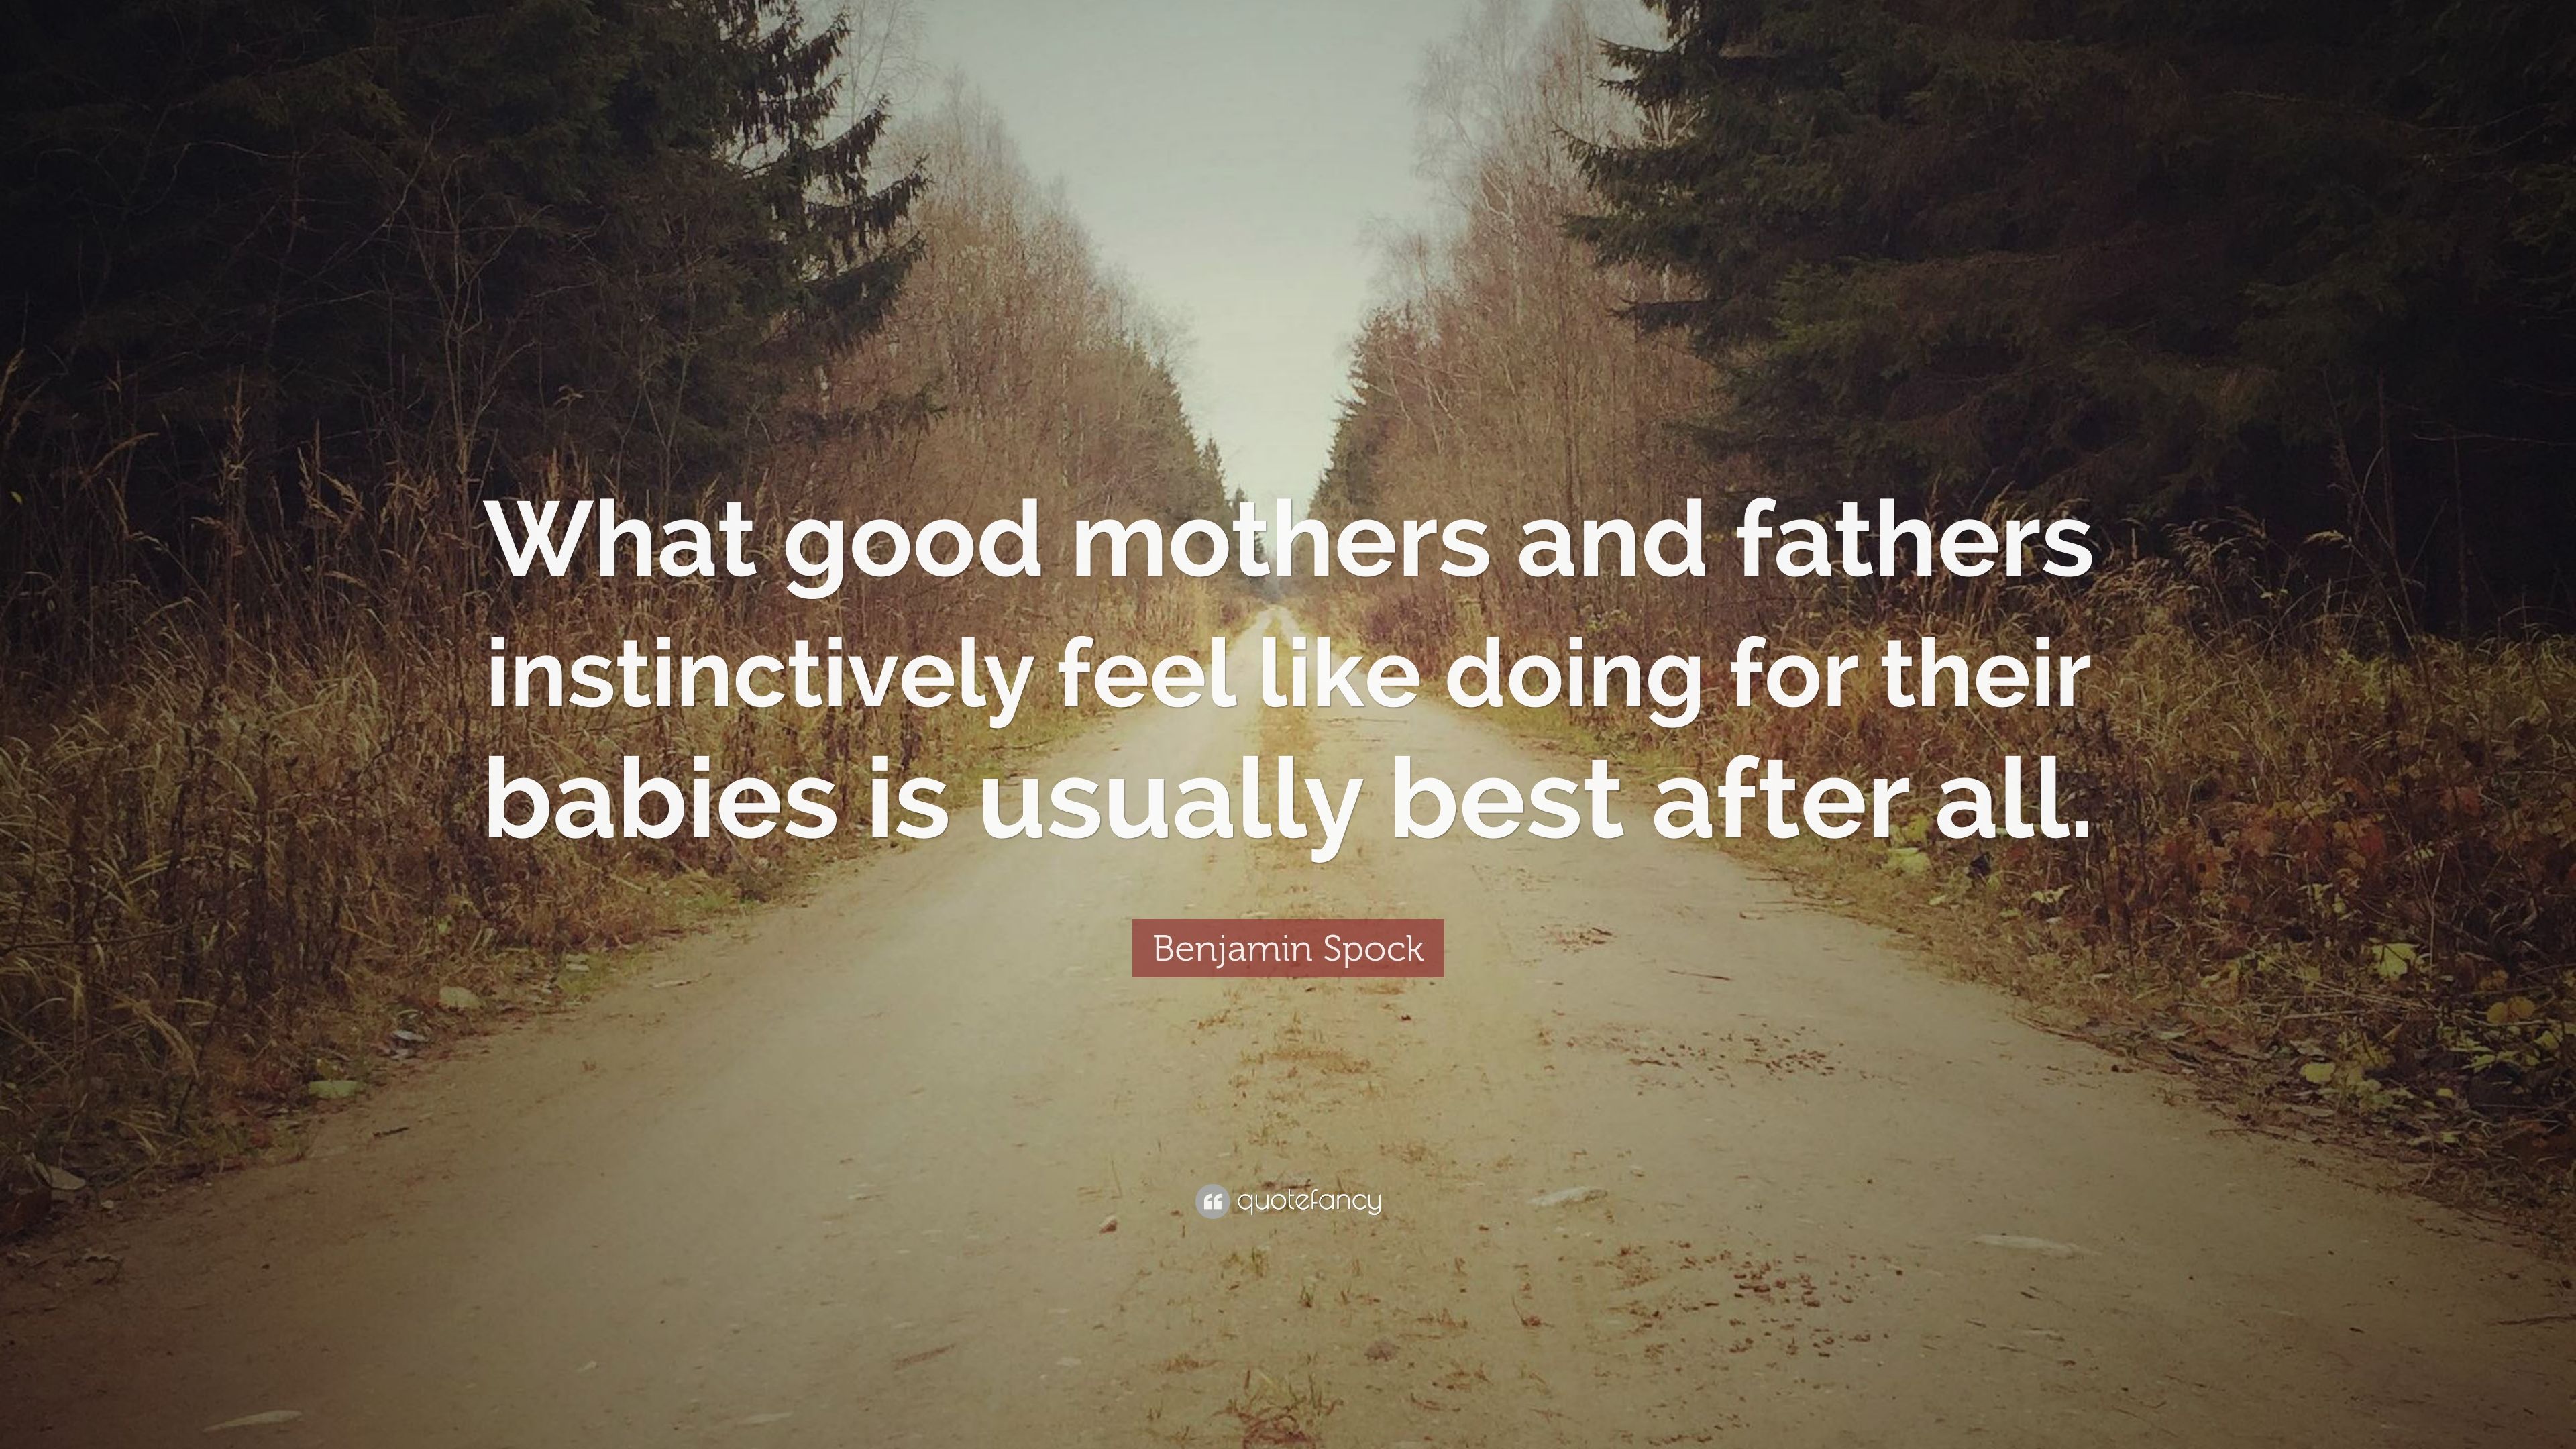 Benjamin Spock Quote: “What good mothers and fathers instinctively